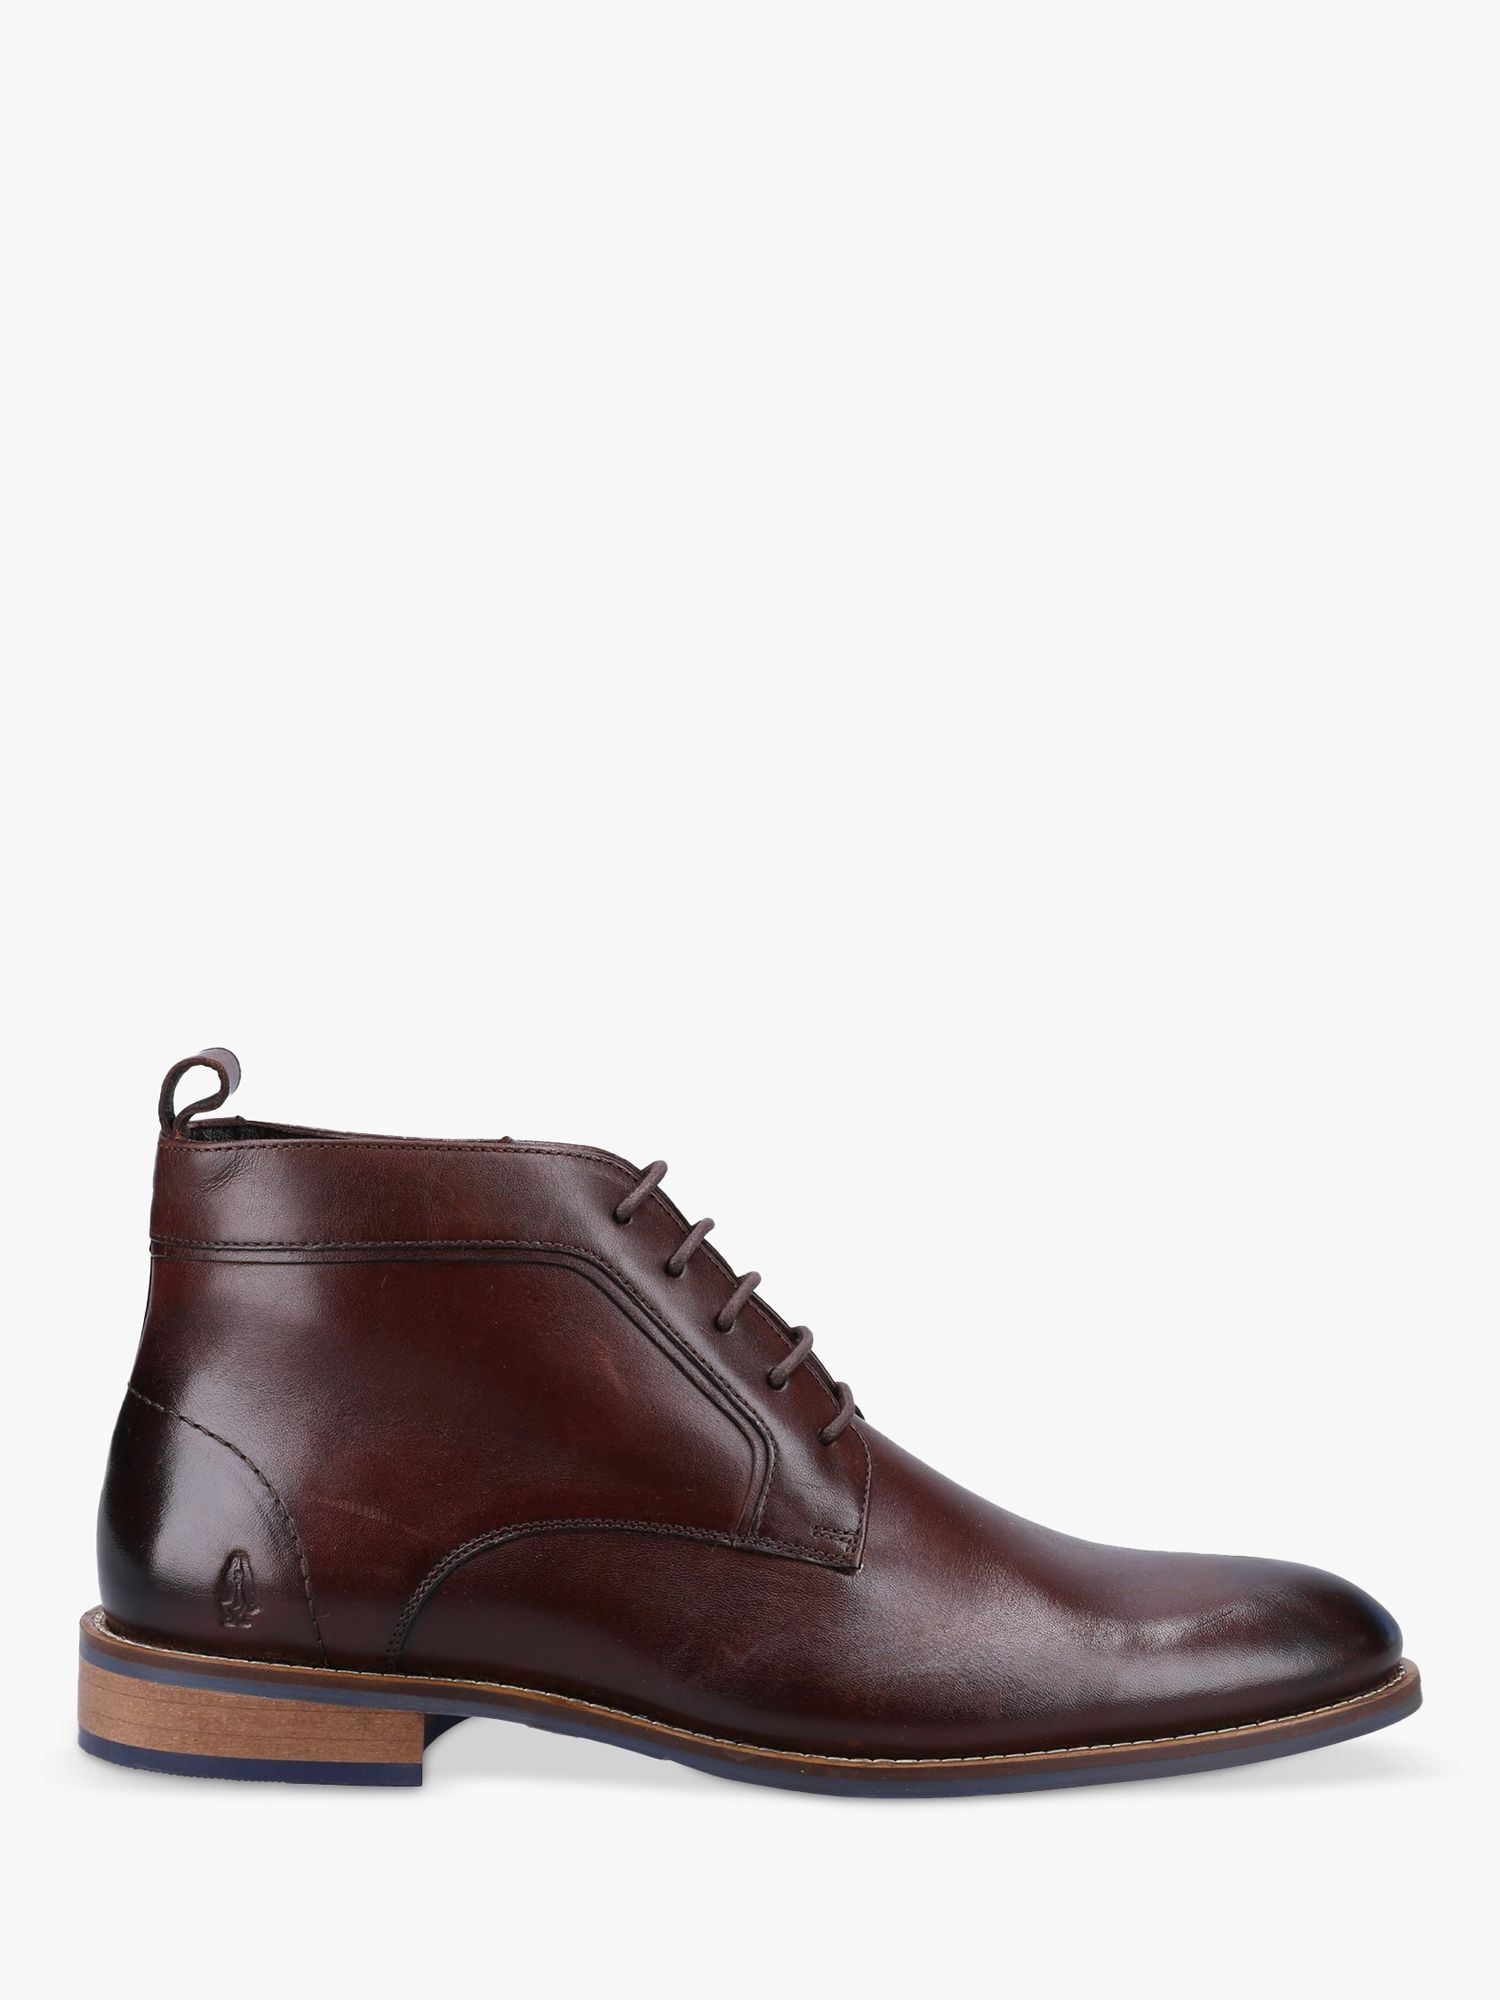 Hush Puppies Declan Leather Lace Up Ankle Boots at John Lewis & Partners